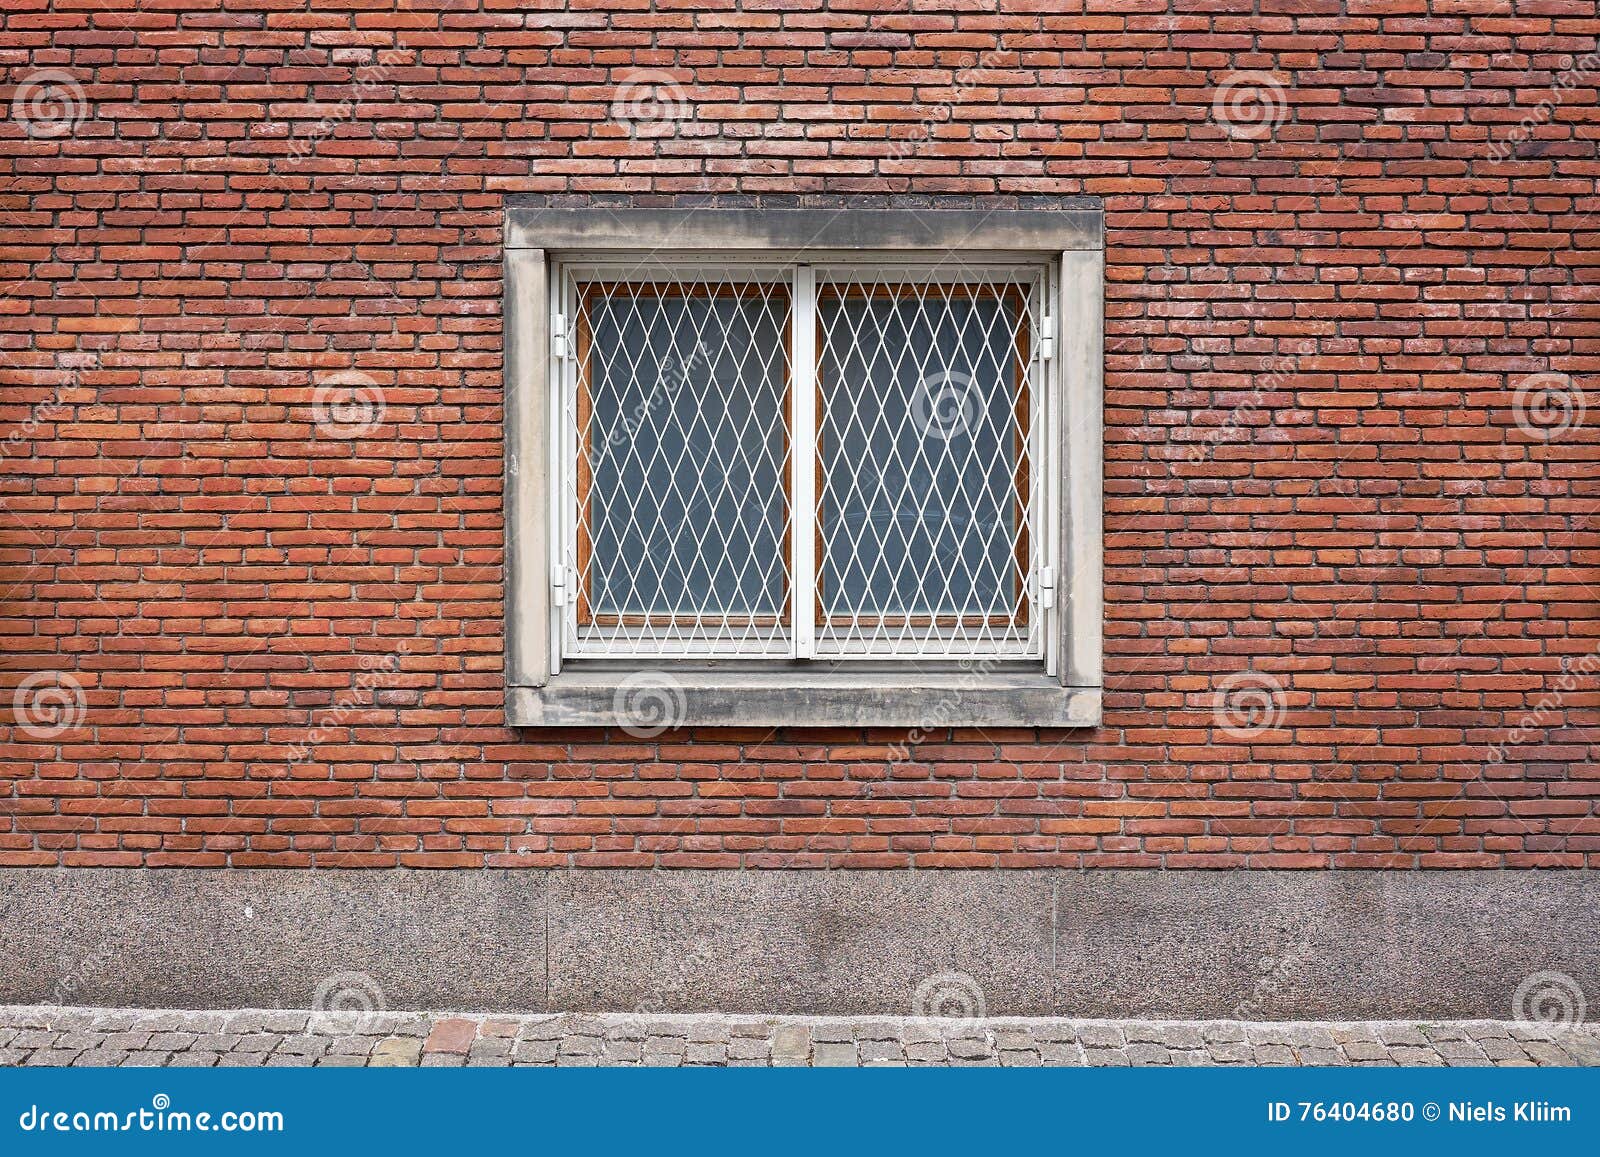 double casement window with grill